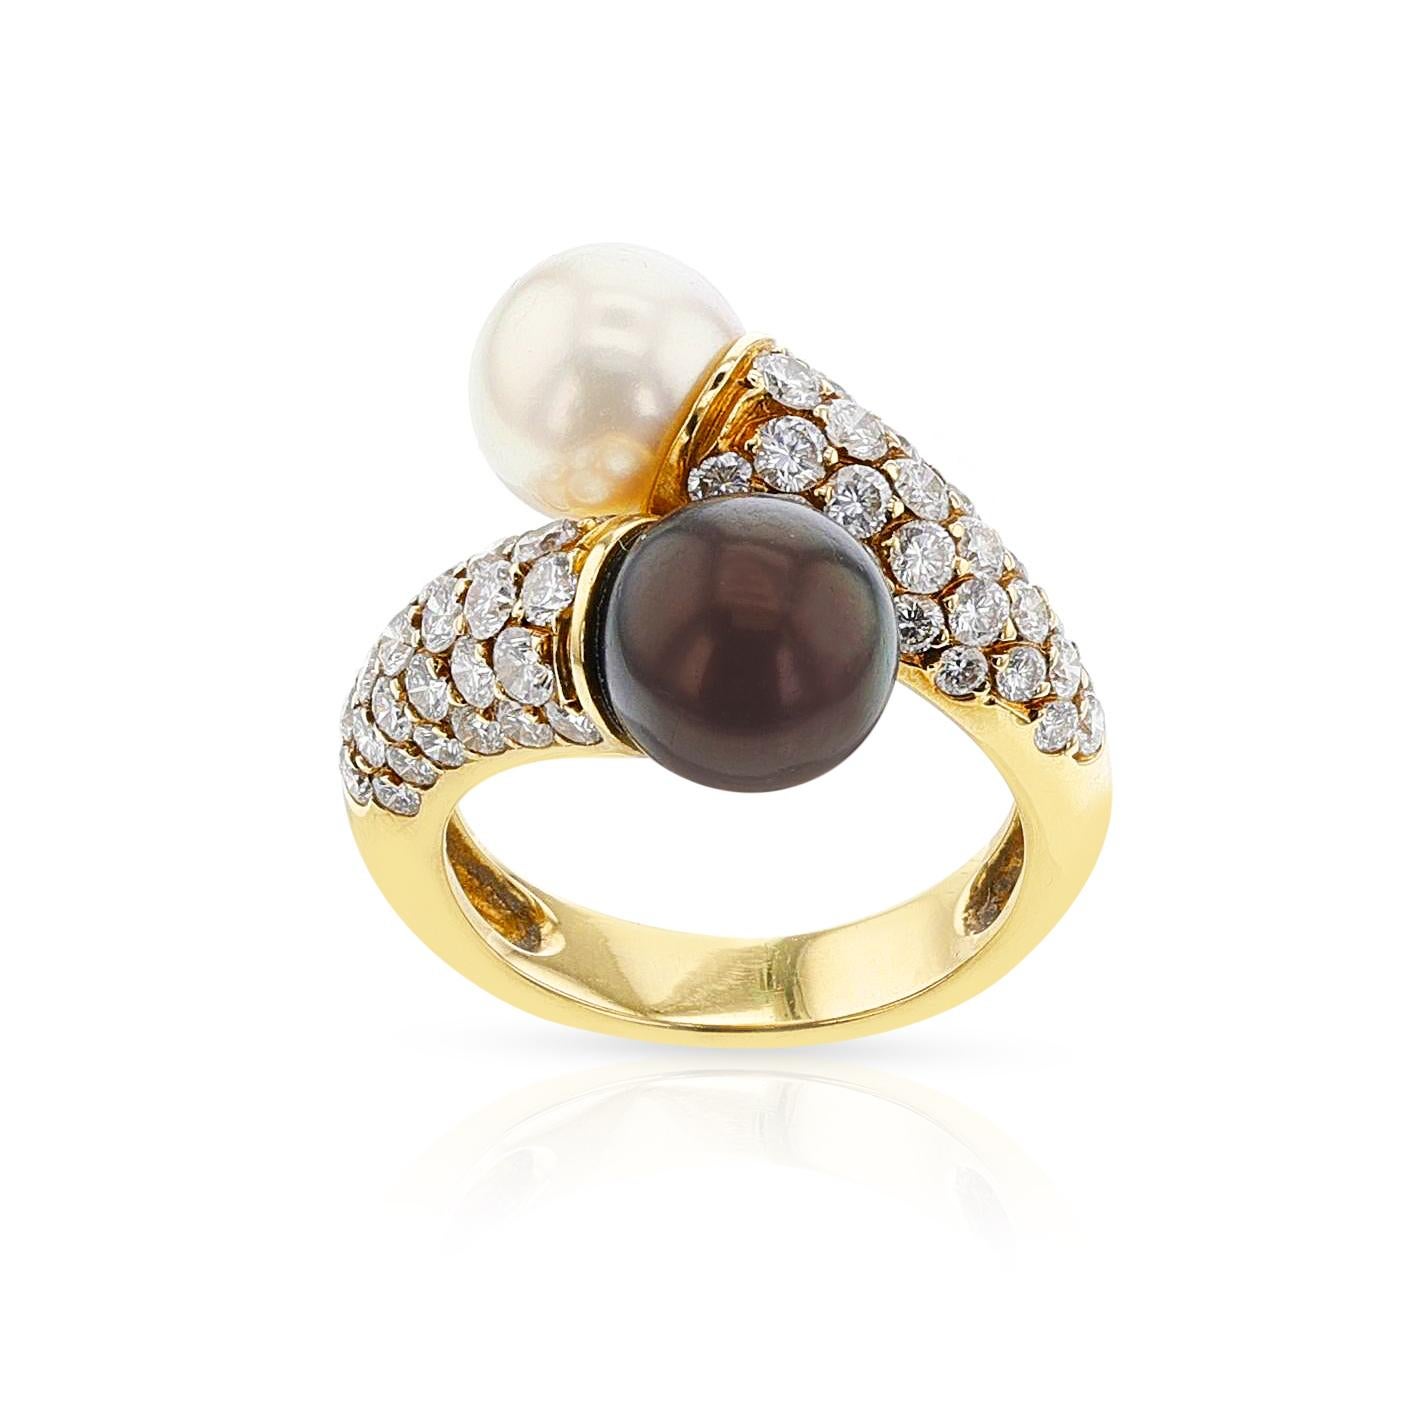 Van Cleef & Arpels Toi Et Moi Pearl Ring with Diamonds, 18k. Ring Size 5.50 US. - signed VCA and numbered B 5152 P 29.

SKU: 1404-EJAJMPL